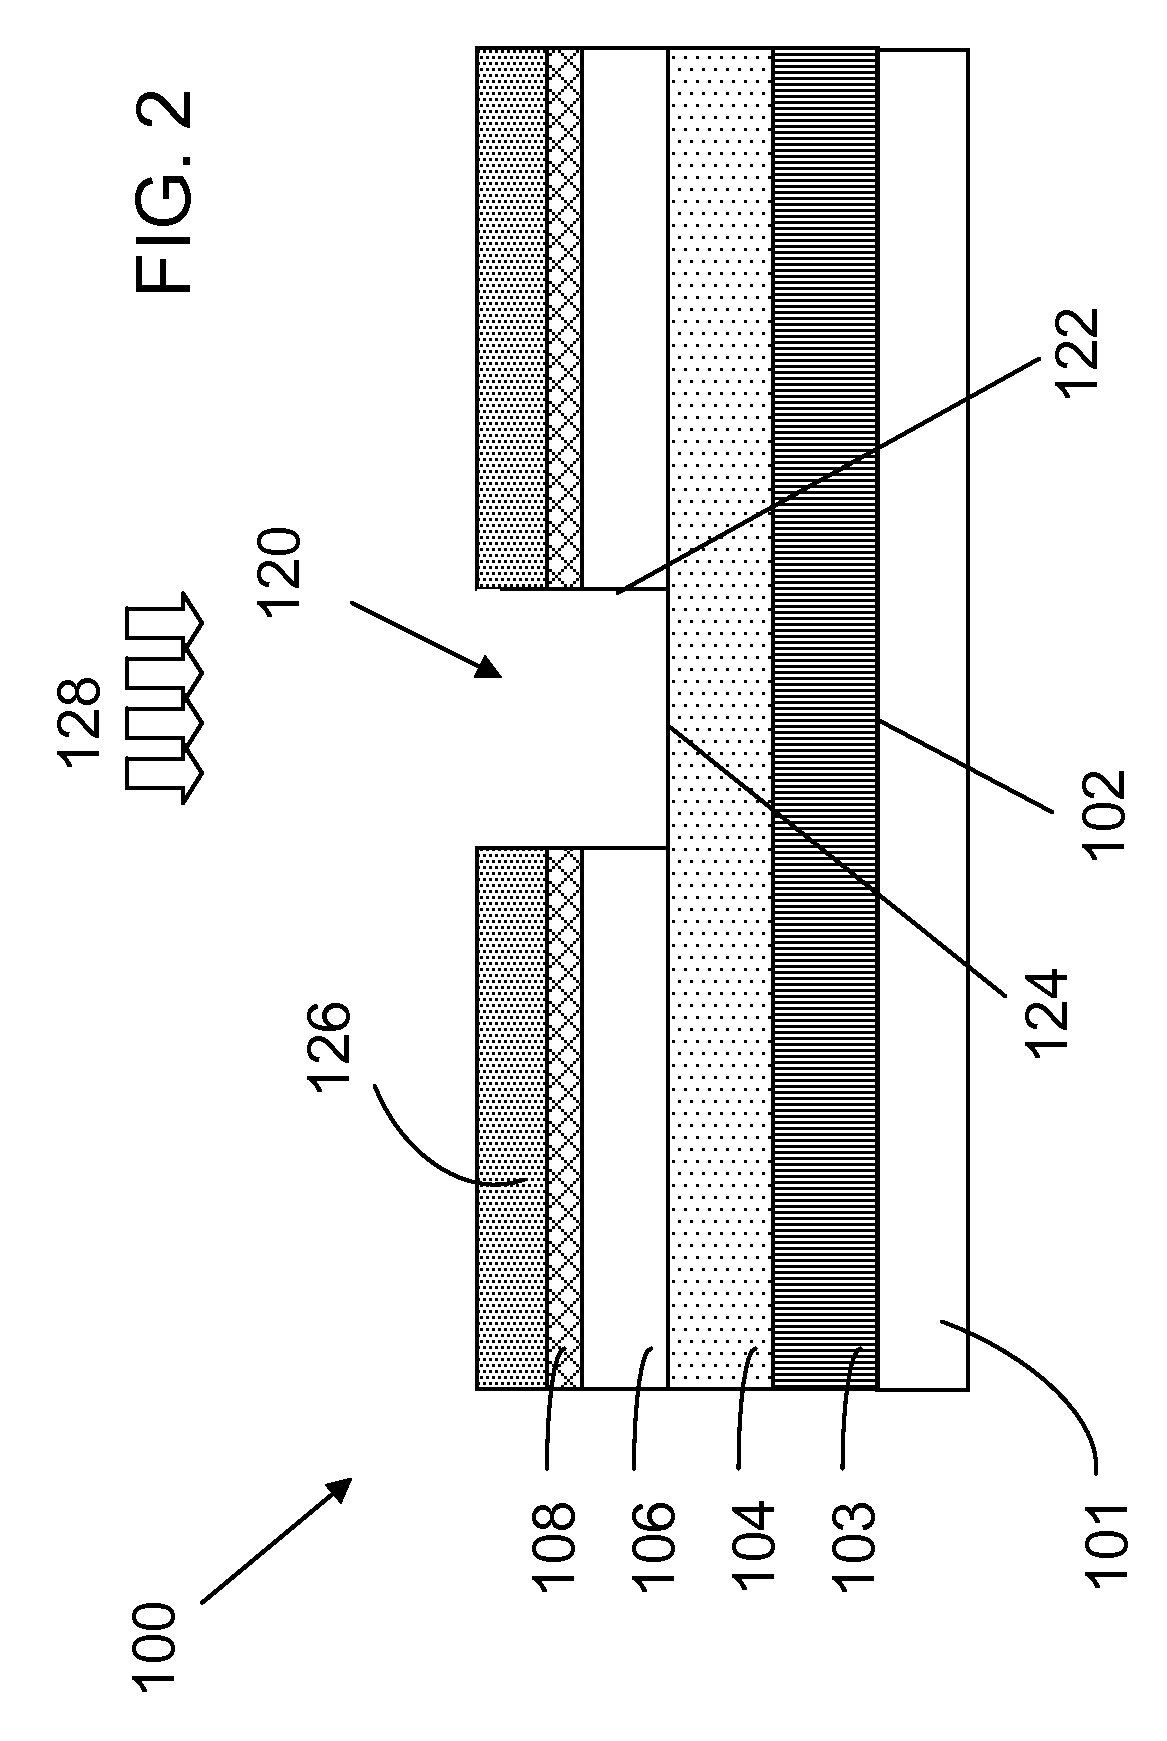 Methods for forming dense dielectric layer over porous dielectrics